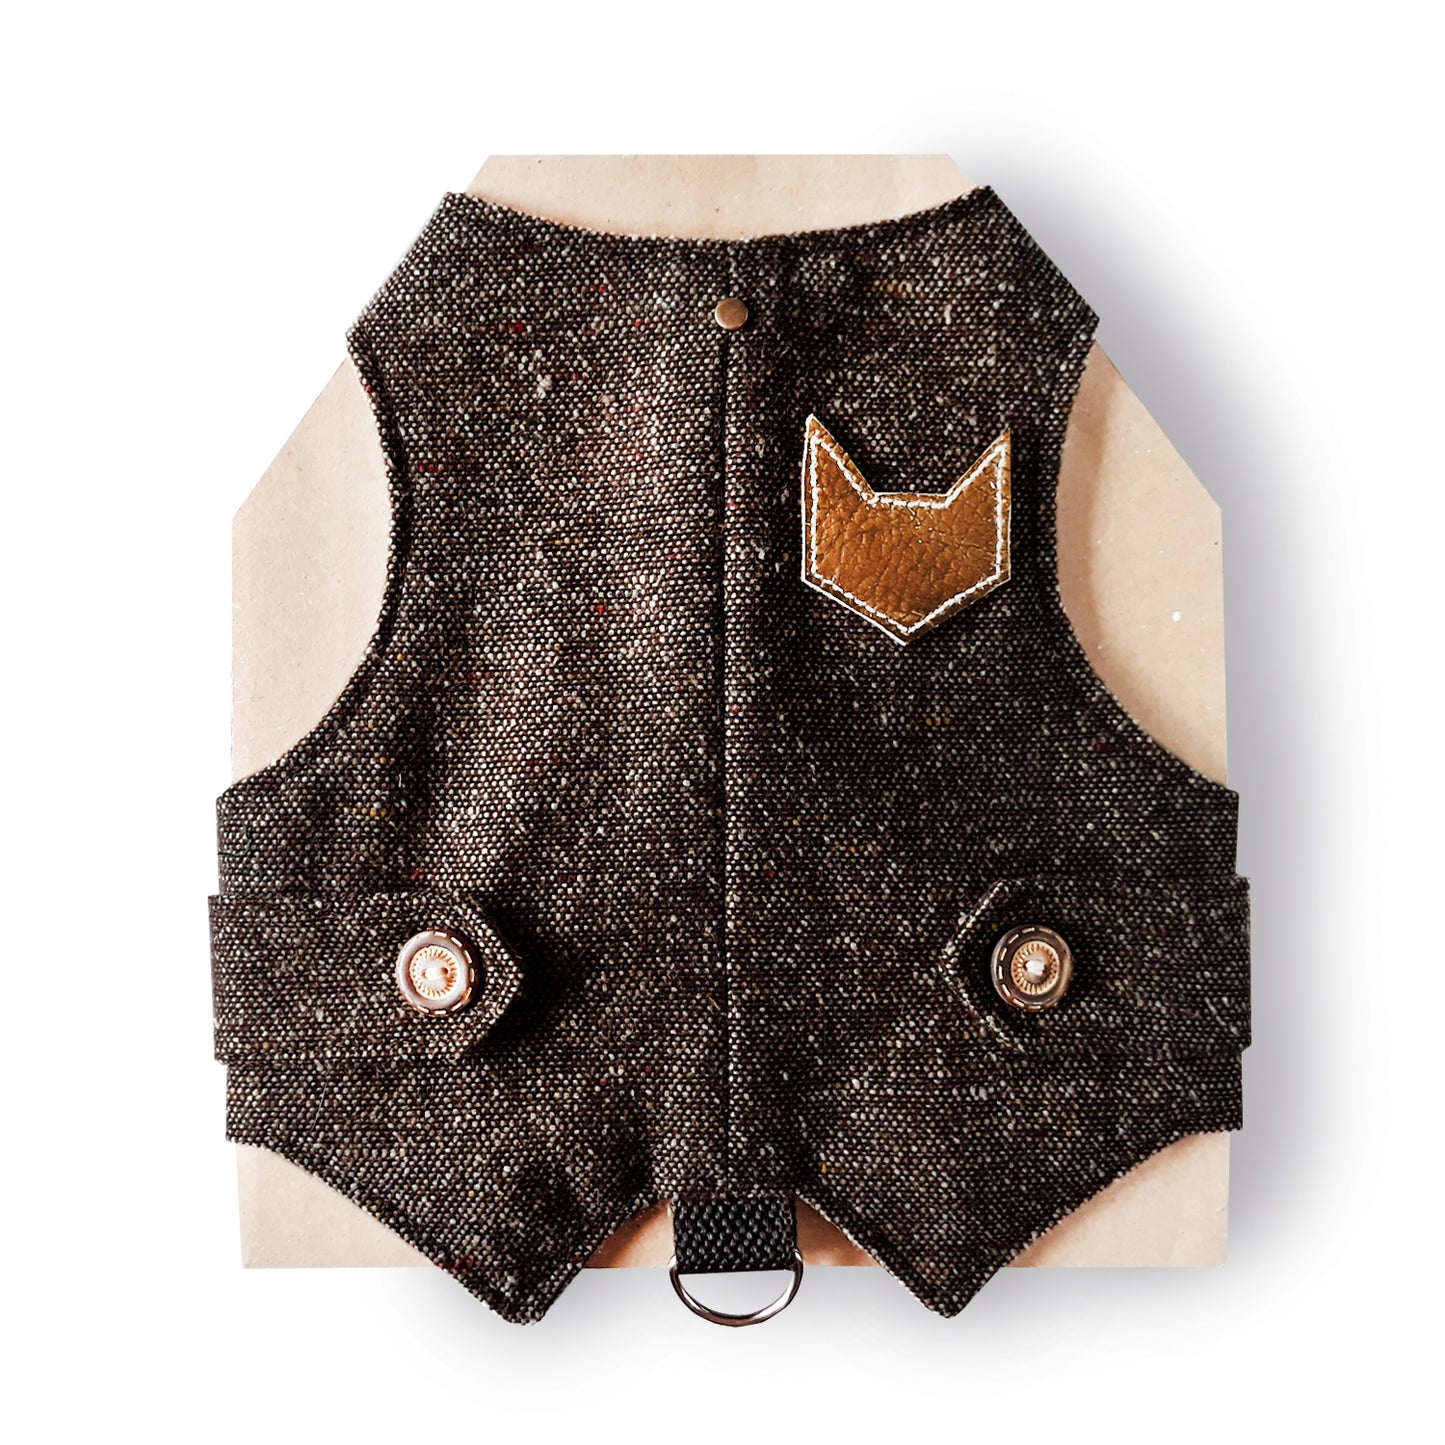 Difficult to escape tweed cat harness "Dark Kazuki". Personalization is available